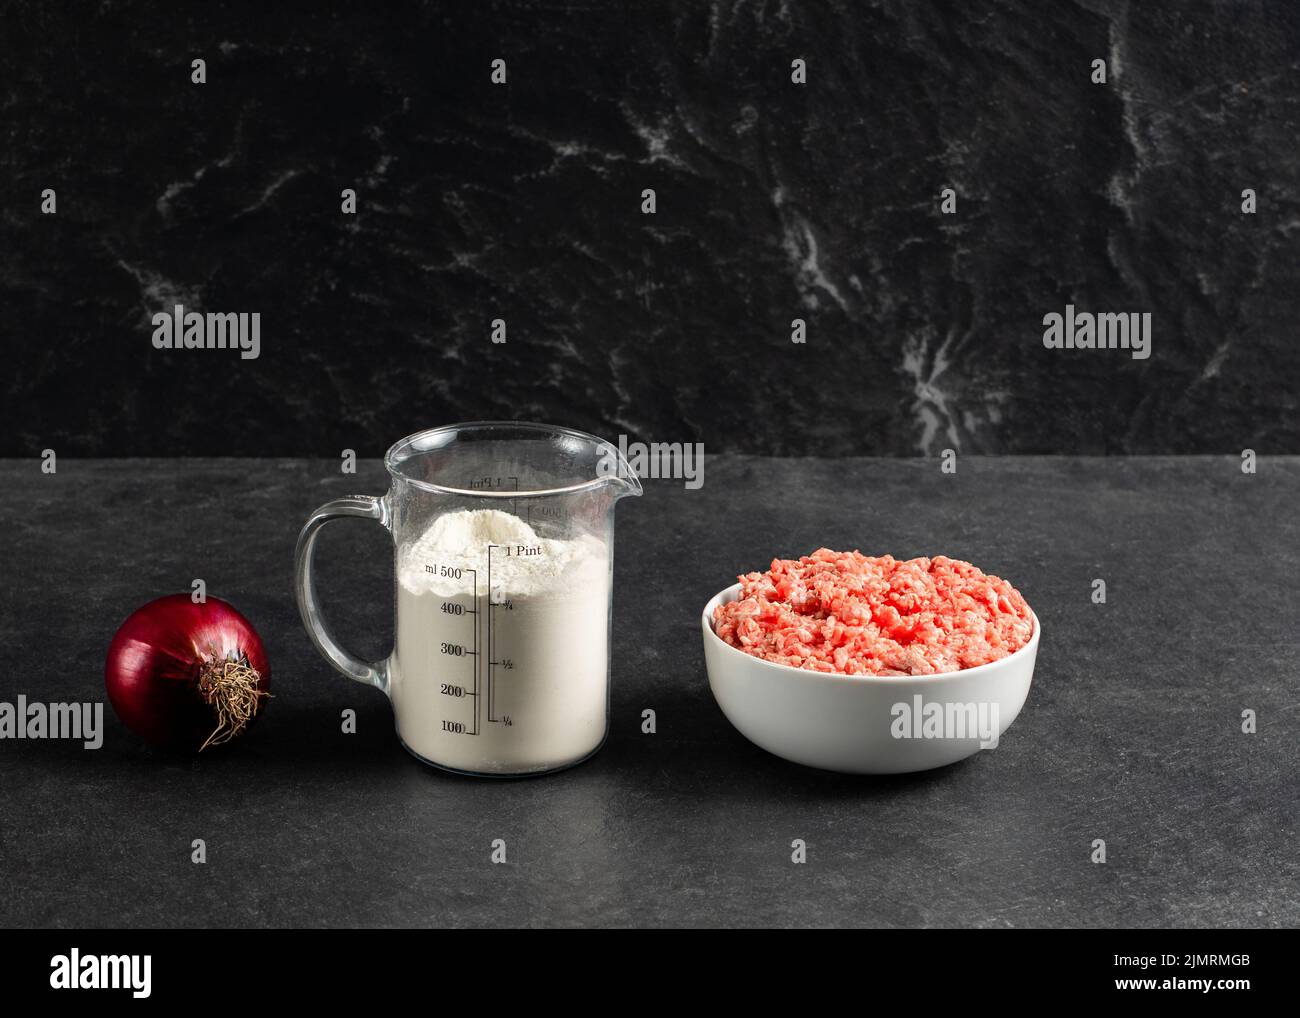 Plate with fresh ground beef, red onion, measuring cup with flour on a grey black background, space for text. Stock Photo